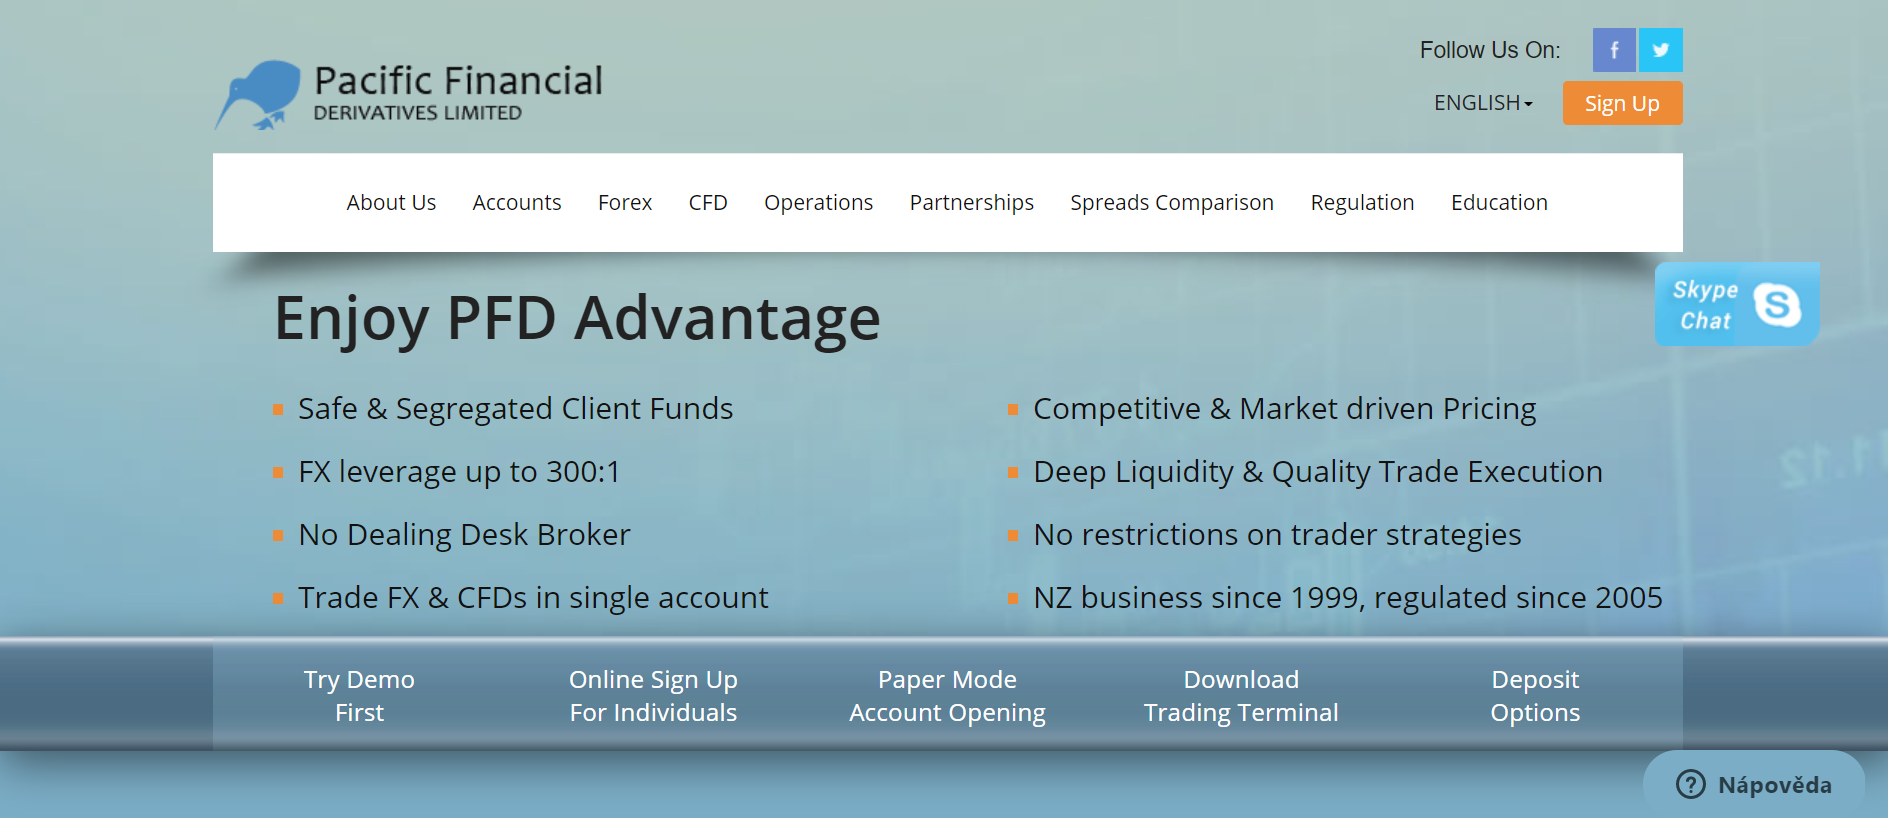 Pacific Financial Derivatives Limited Web